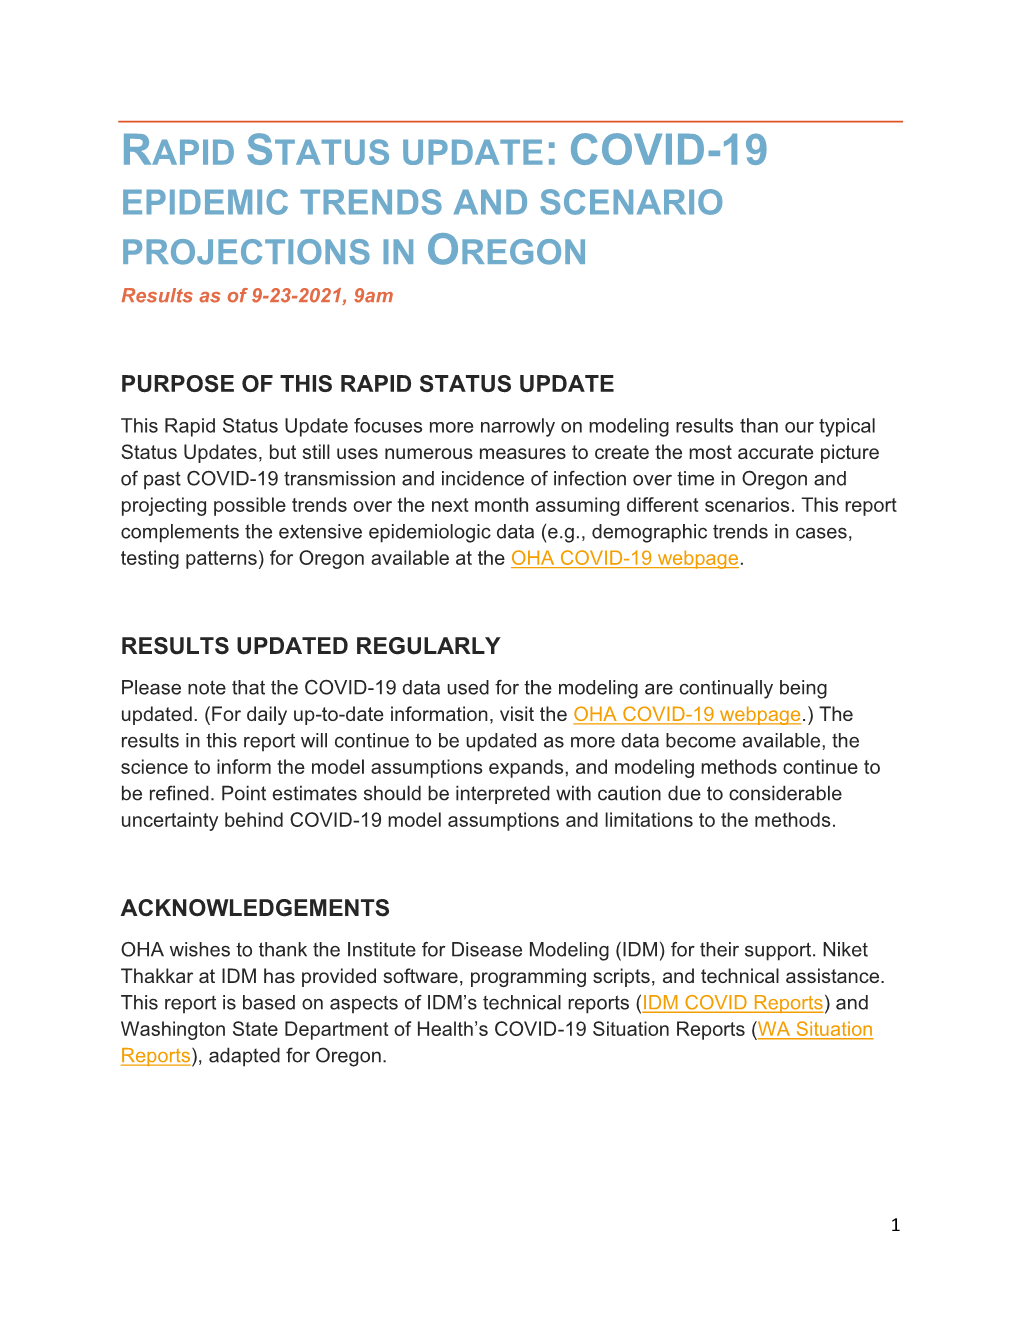 COVID-19 EPIDEMIC TRENDS and SCENARIO PROJECTIONS in OREGON Results As of 9-23-2021, 9Am